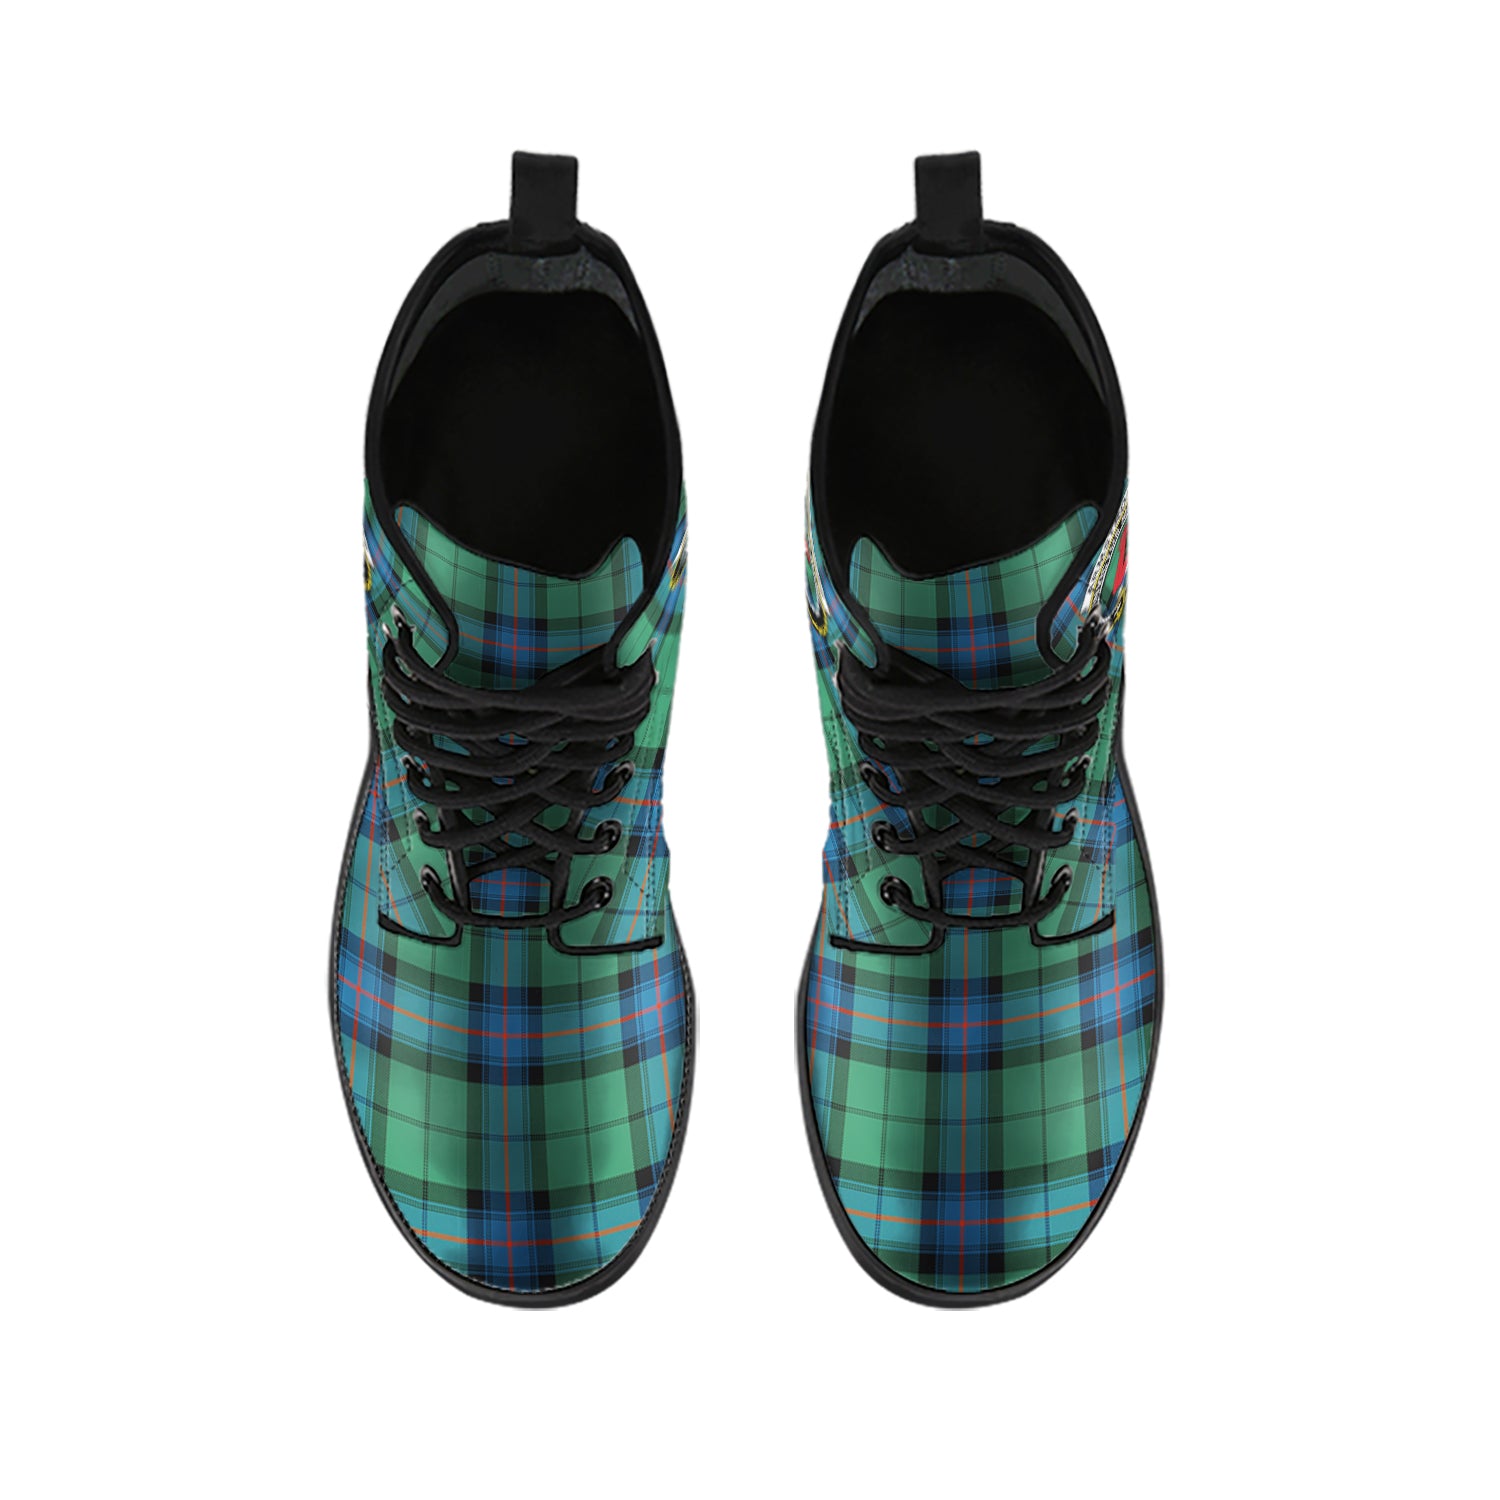 Armstrong Ancient Tartan Leather Boots with Family Crest - Tartanvibesclothing